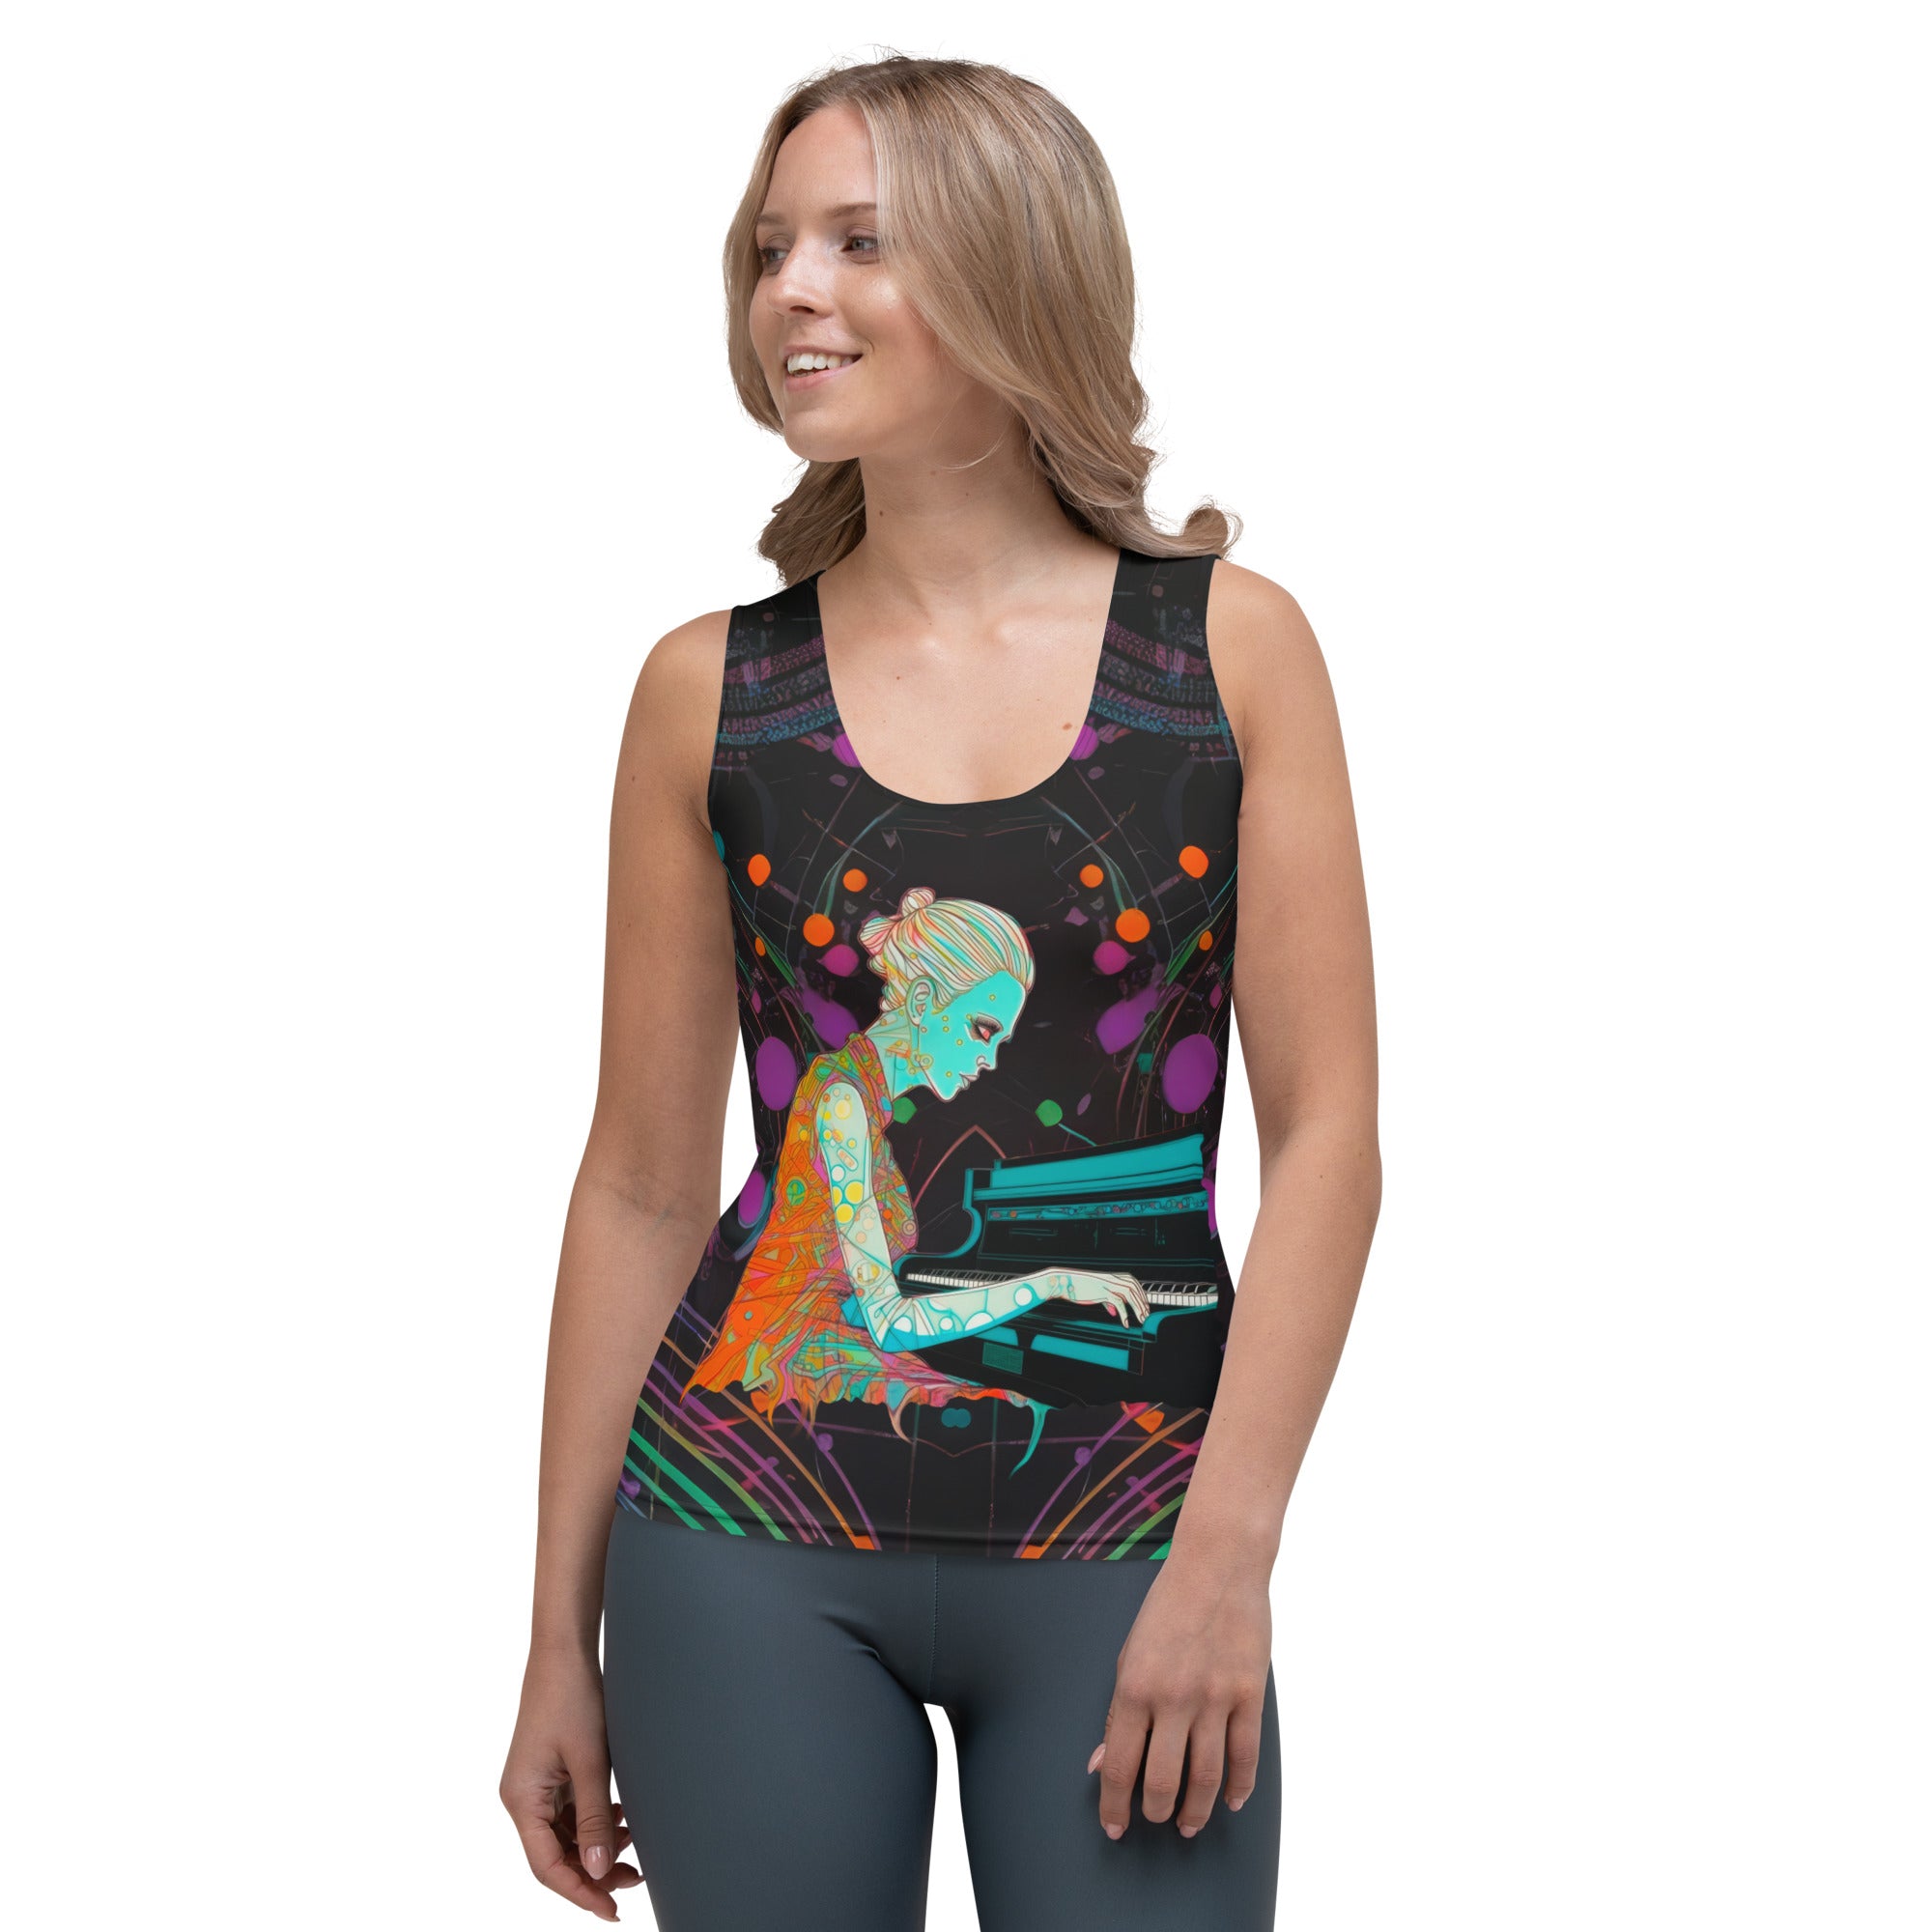 Abstract Burst pattern on Women's Tank Top showcasing vibrant colors.